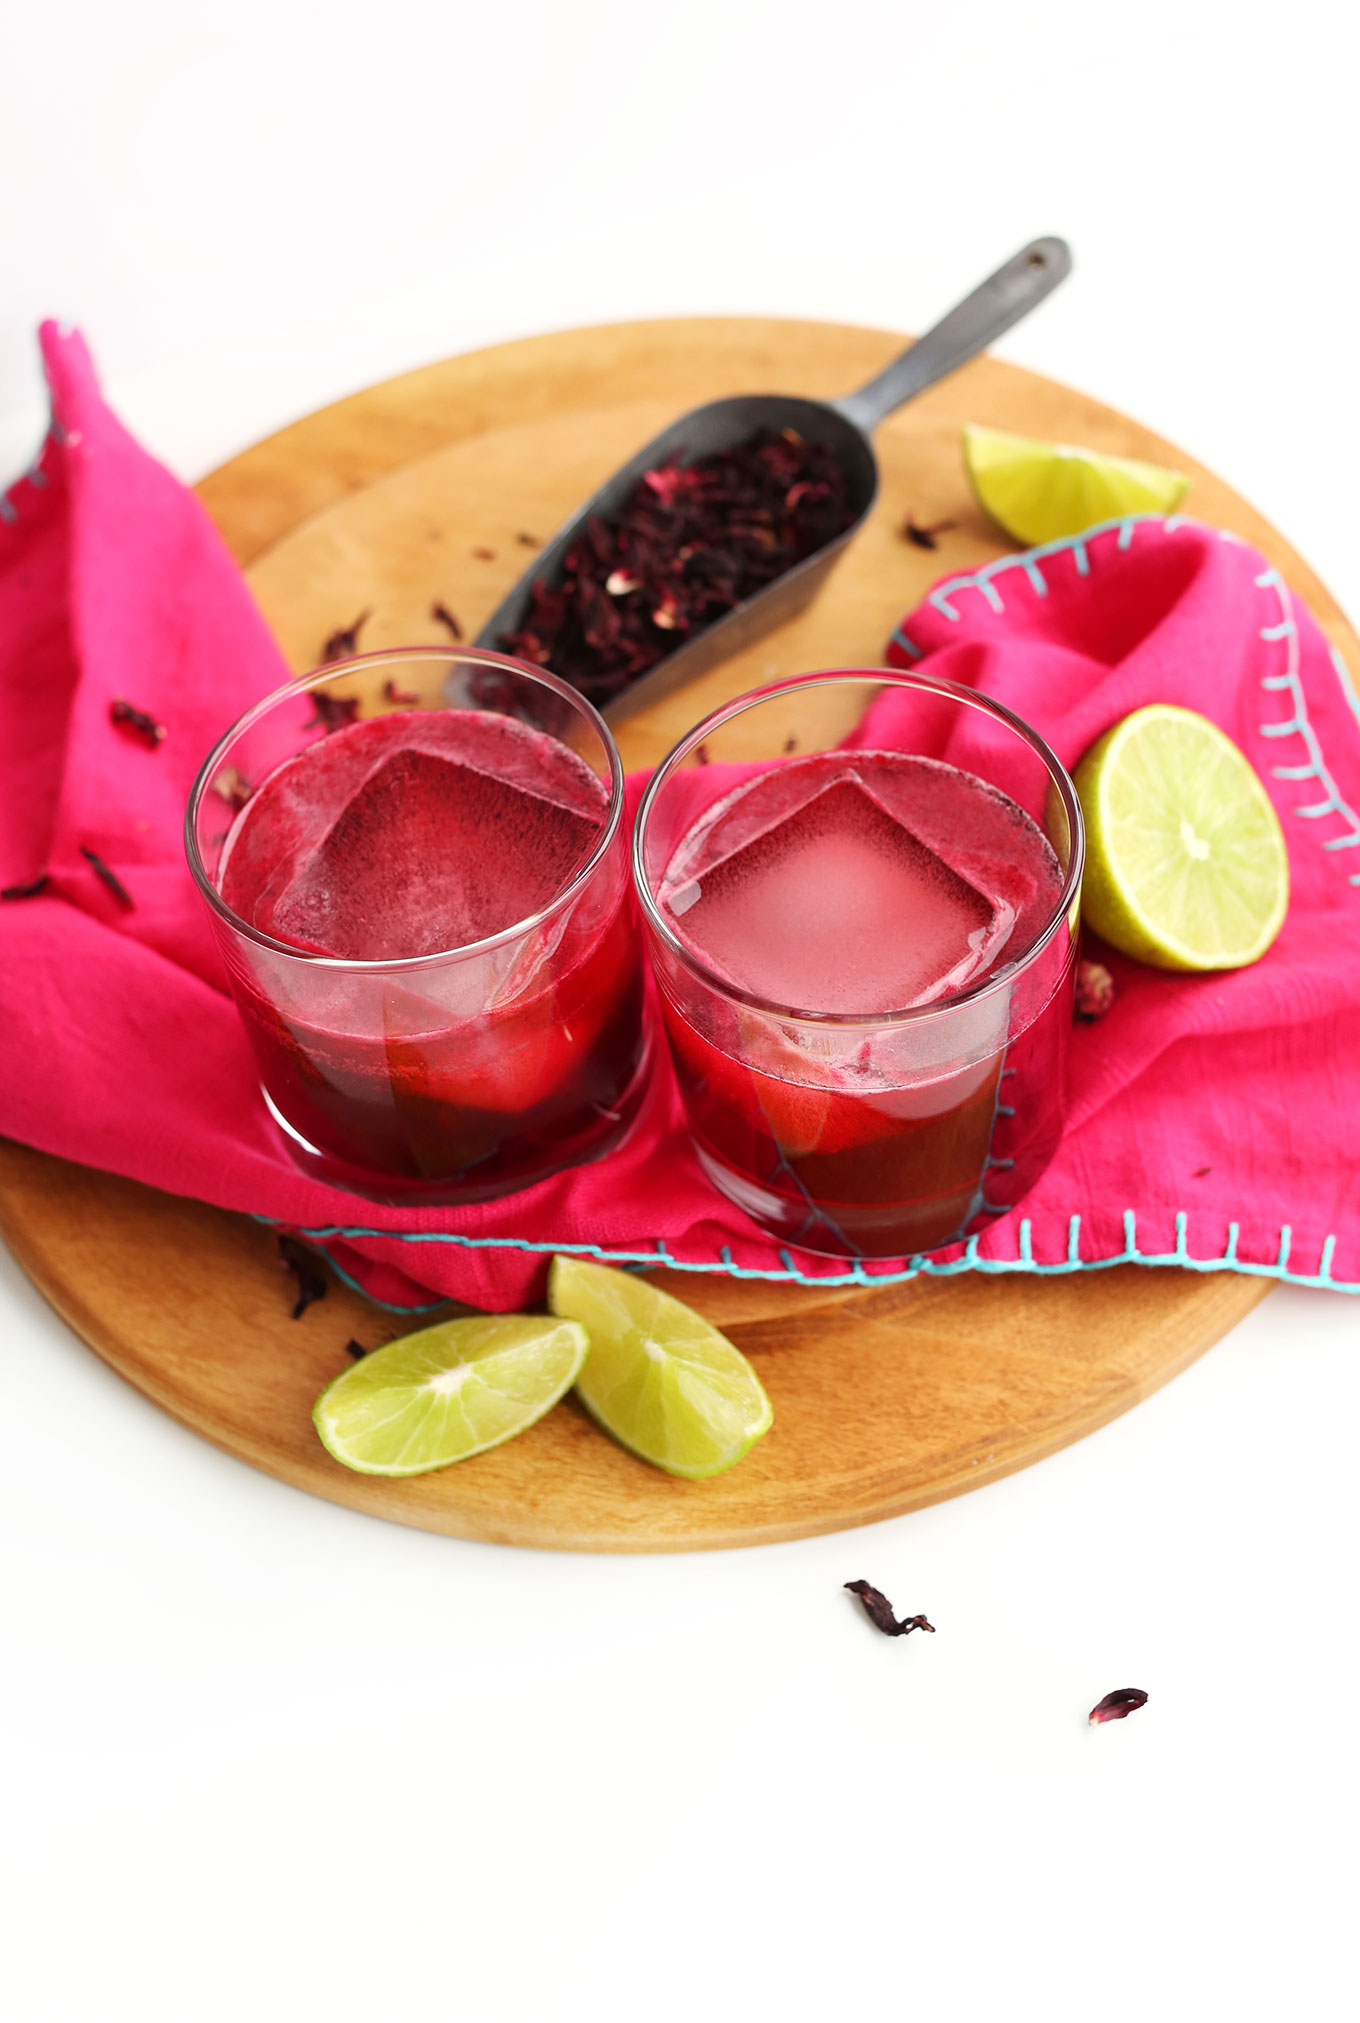 Hibiscus Margaritas resting on a cutting board for a refreshing summer drink